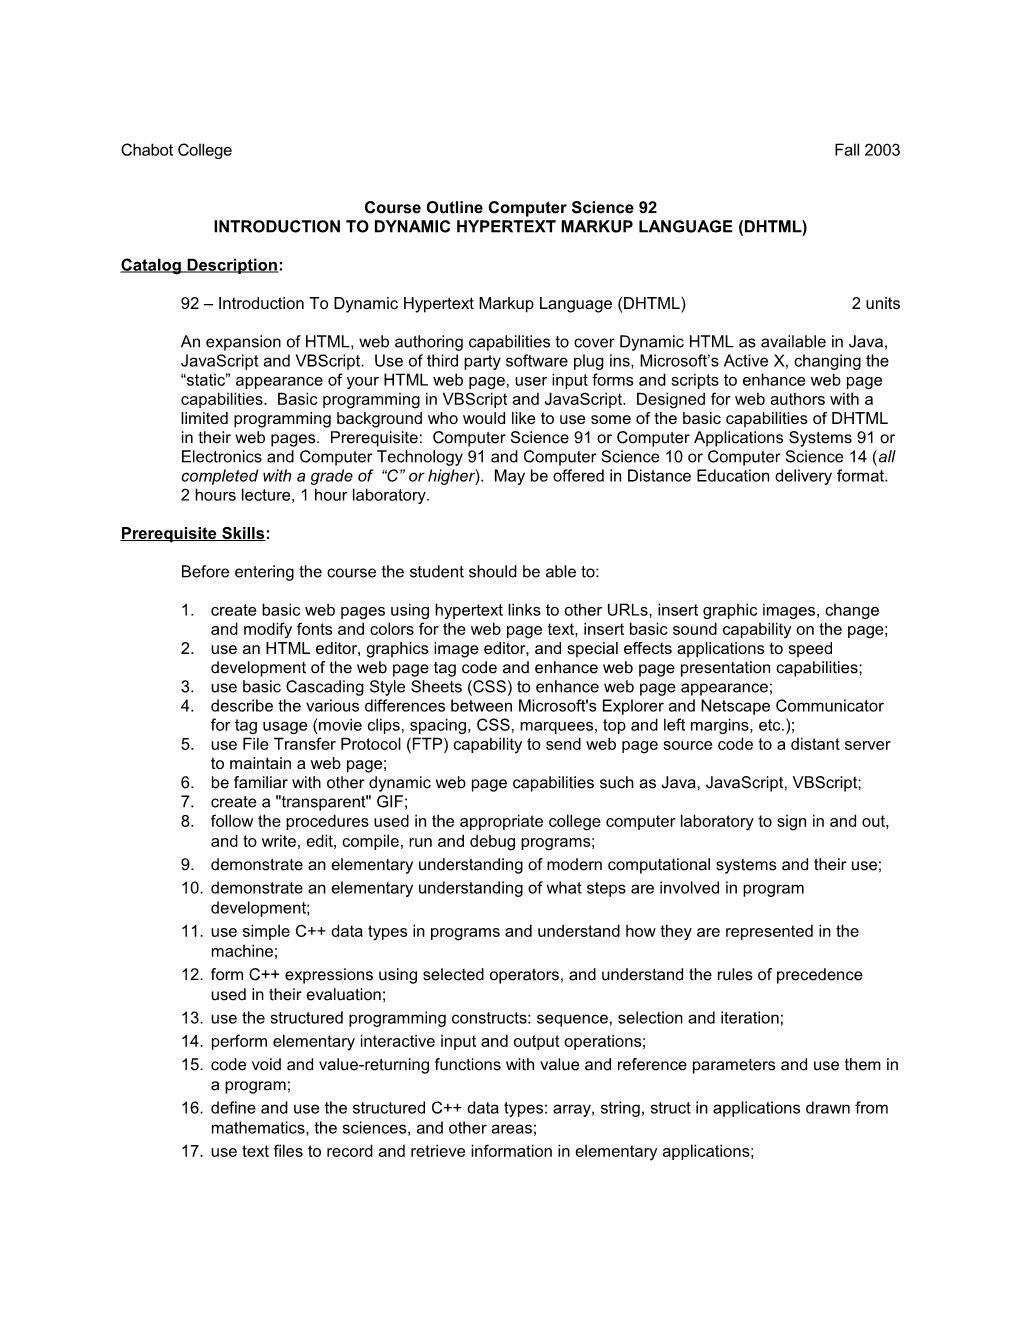 Course Outline for Computer Science 92, Page 2